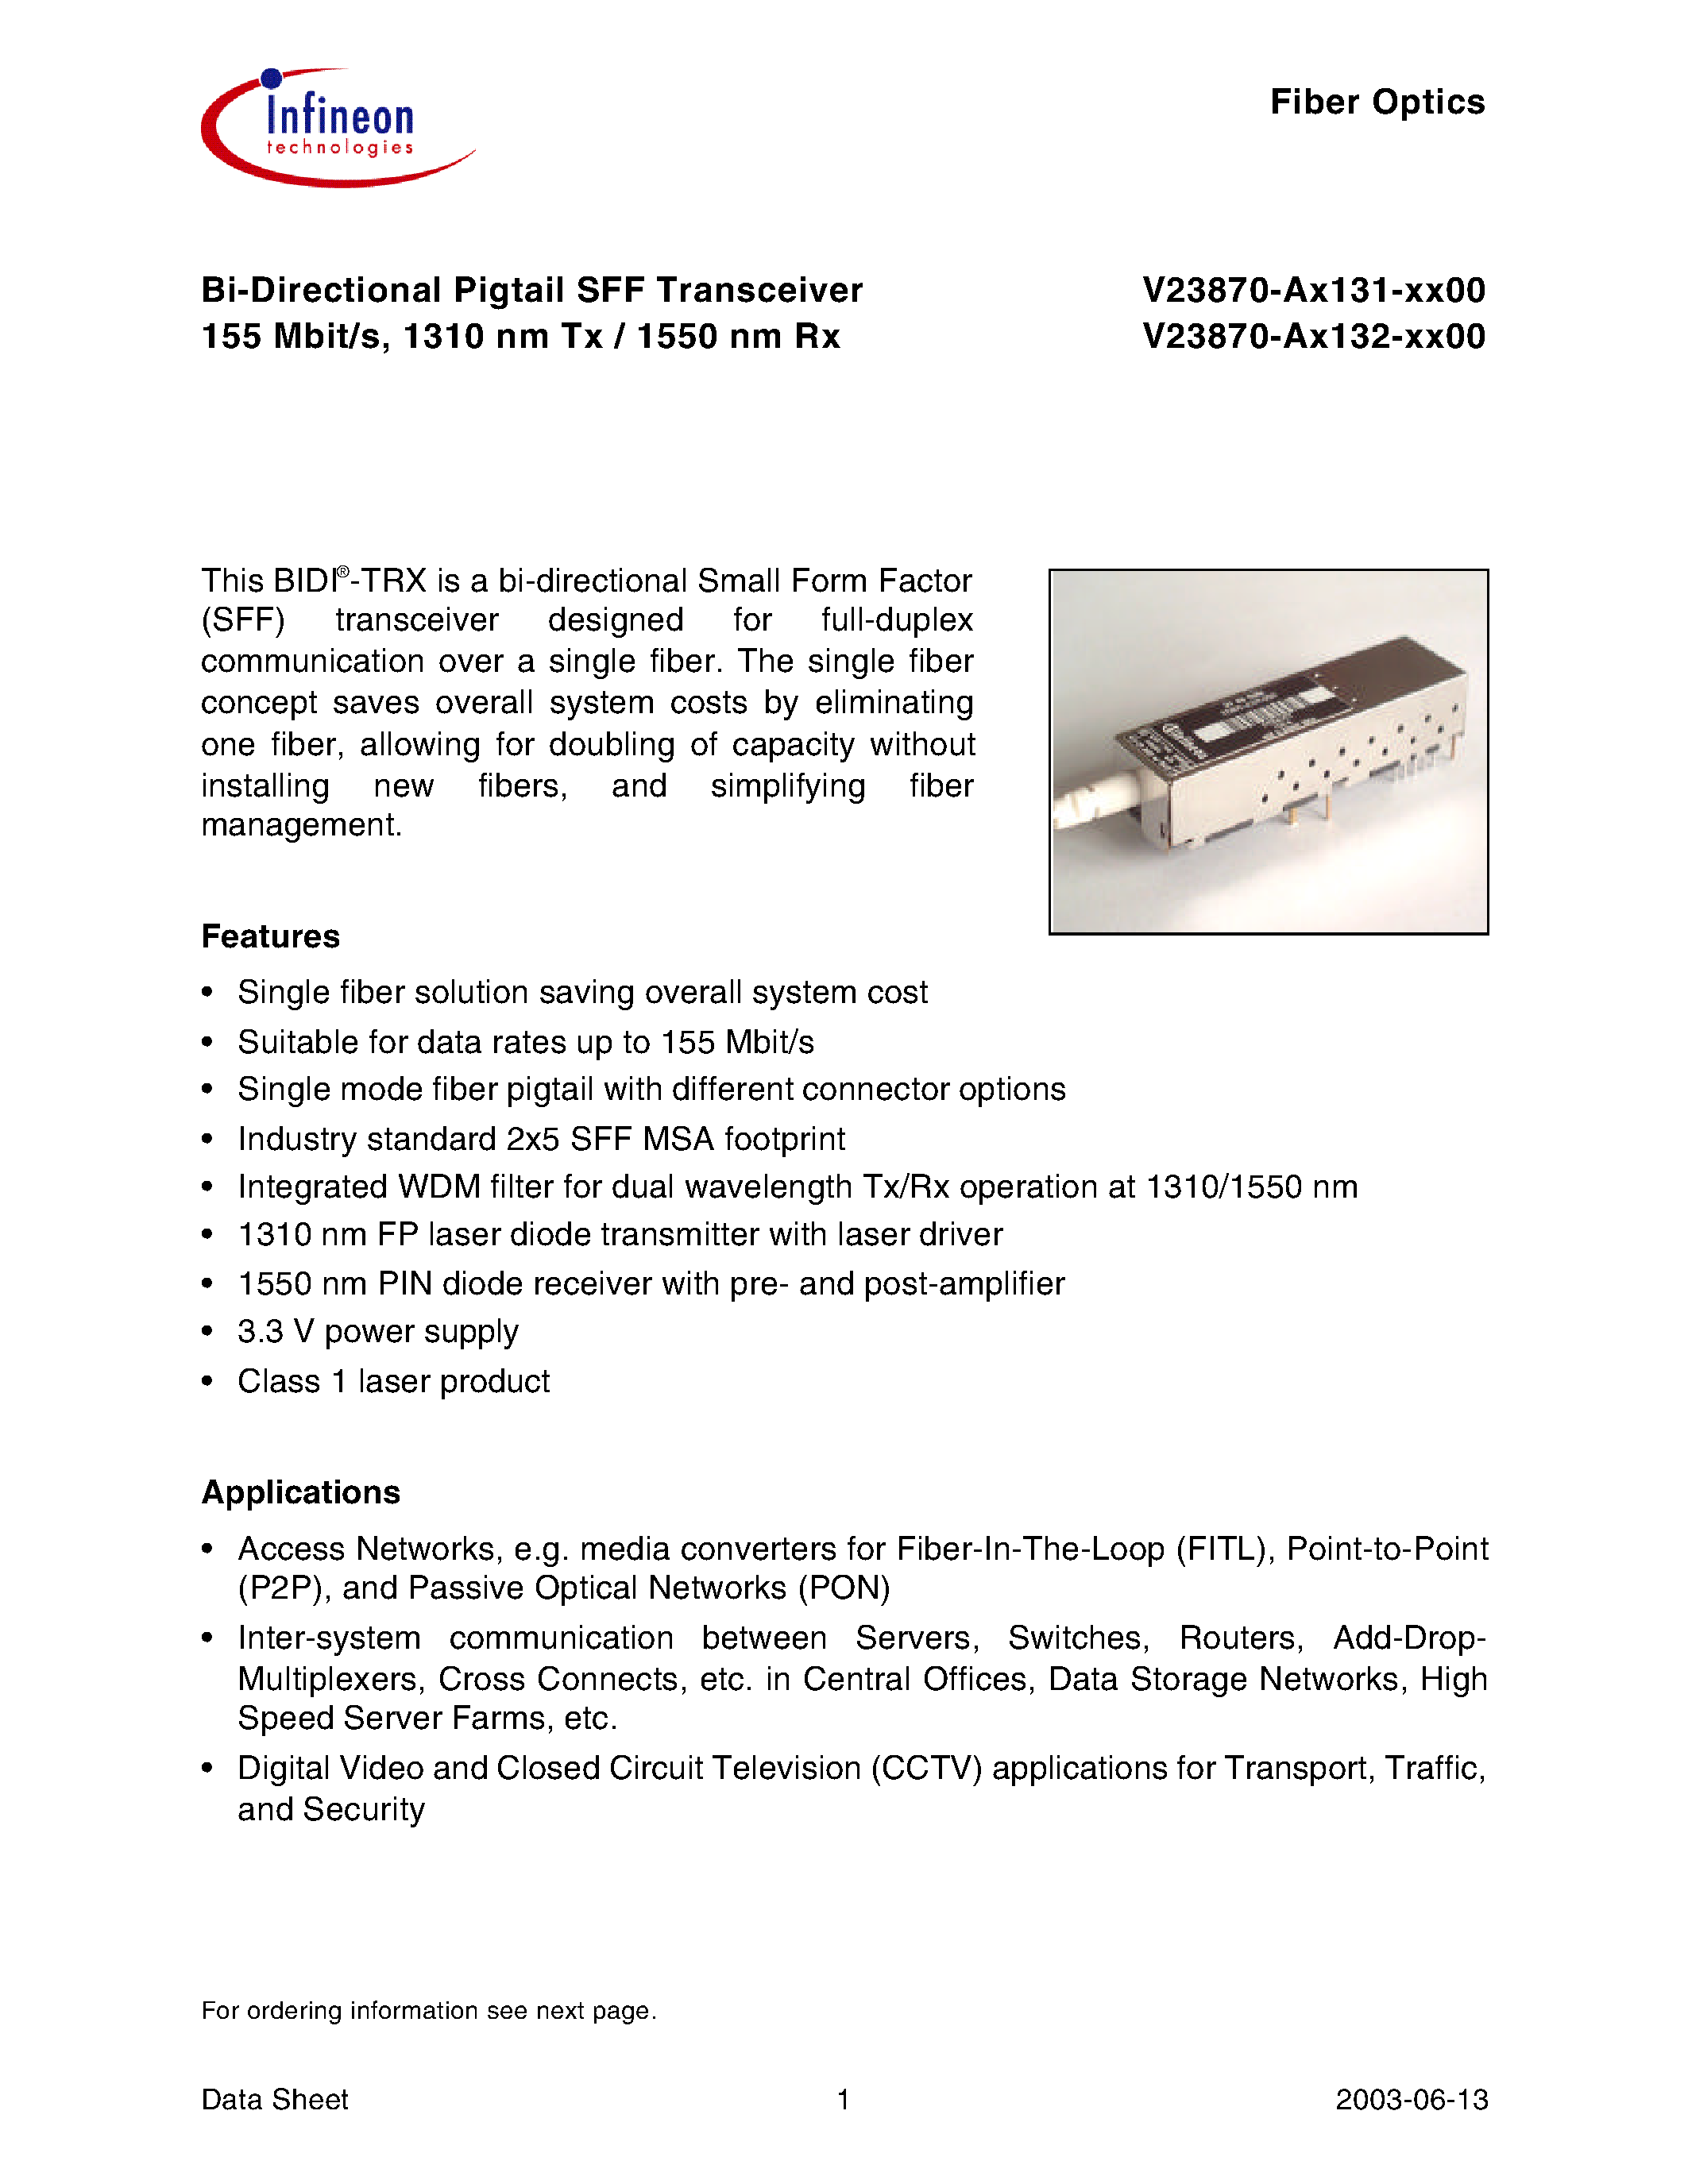 Datasheet V23870-A1132-H600 - Bi-Directional Pigtail SFF Transceiver 155 Mbit/s/ 1310 nm Tx / 1550 nm Rx page 1